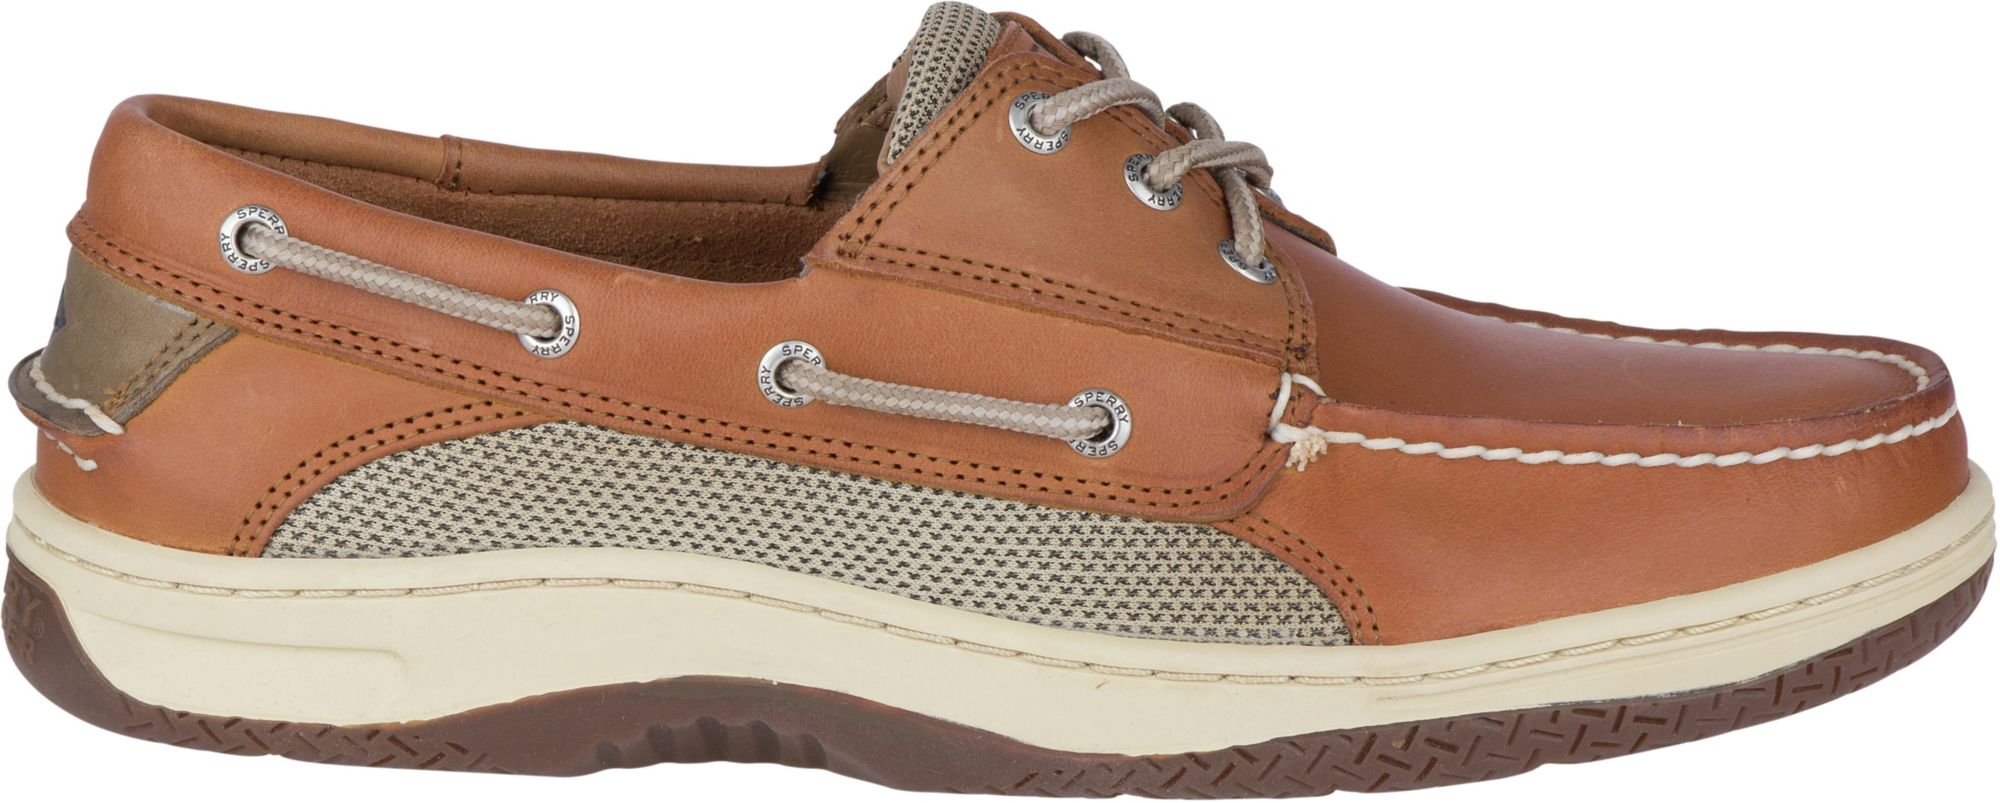 sperry top sider deck shoes mens